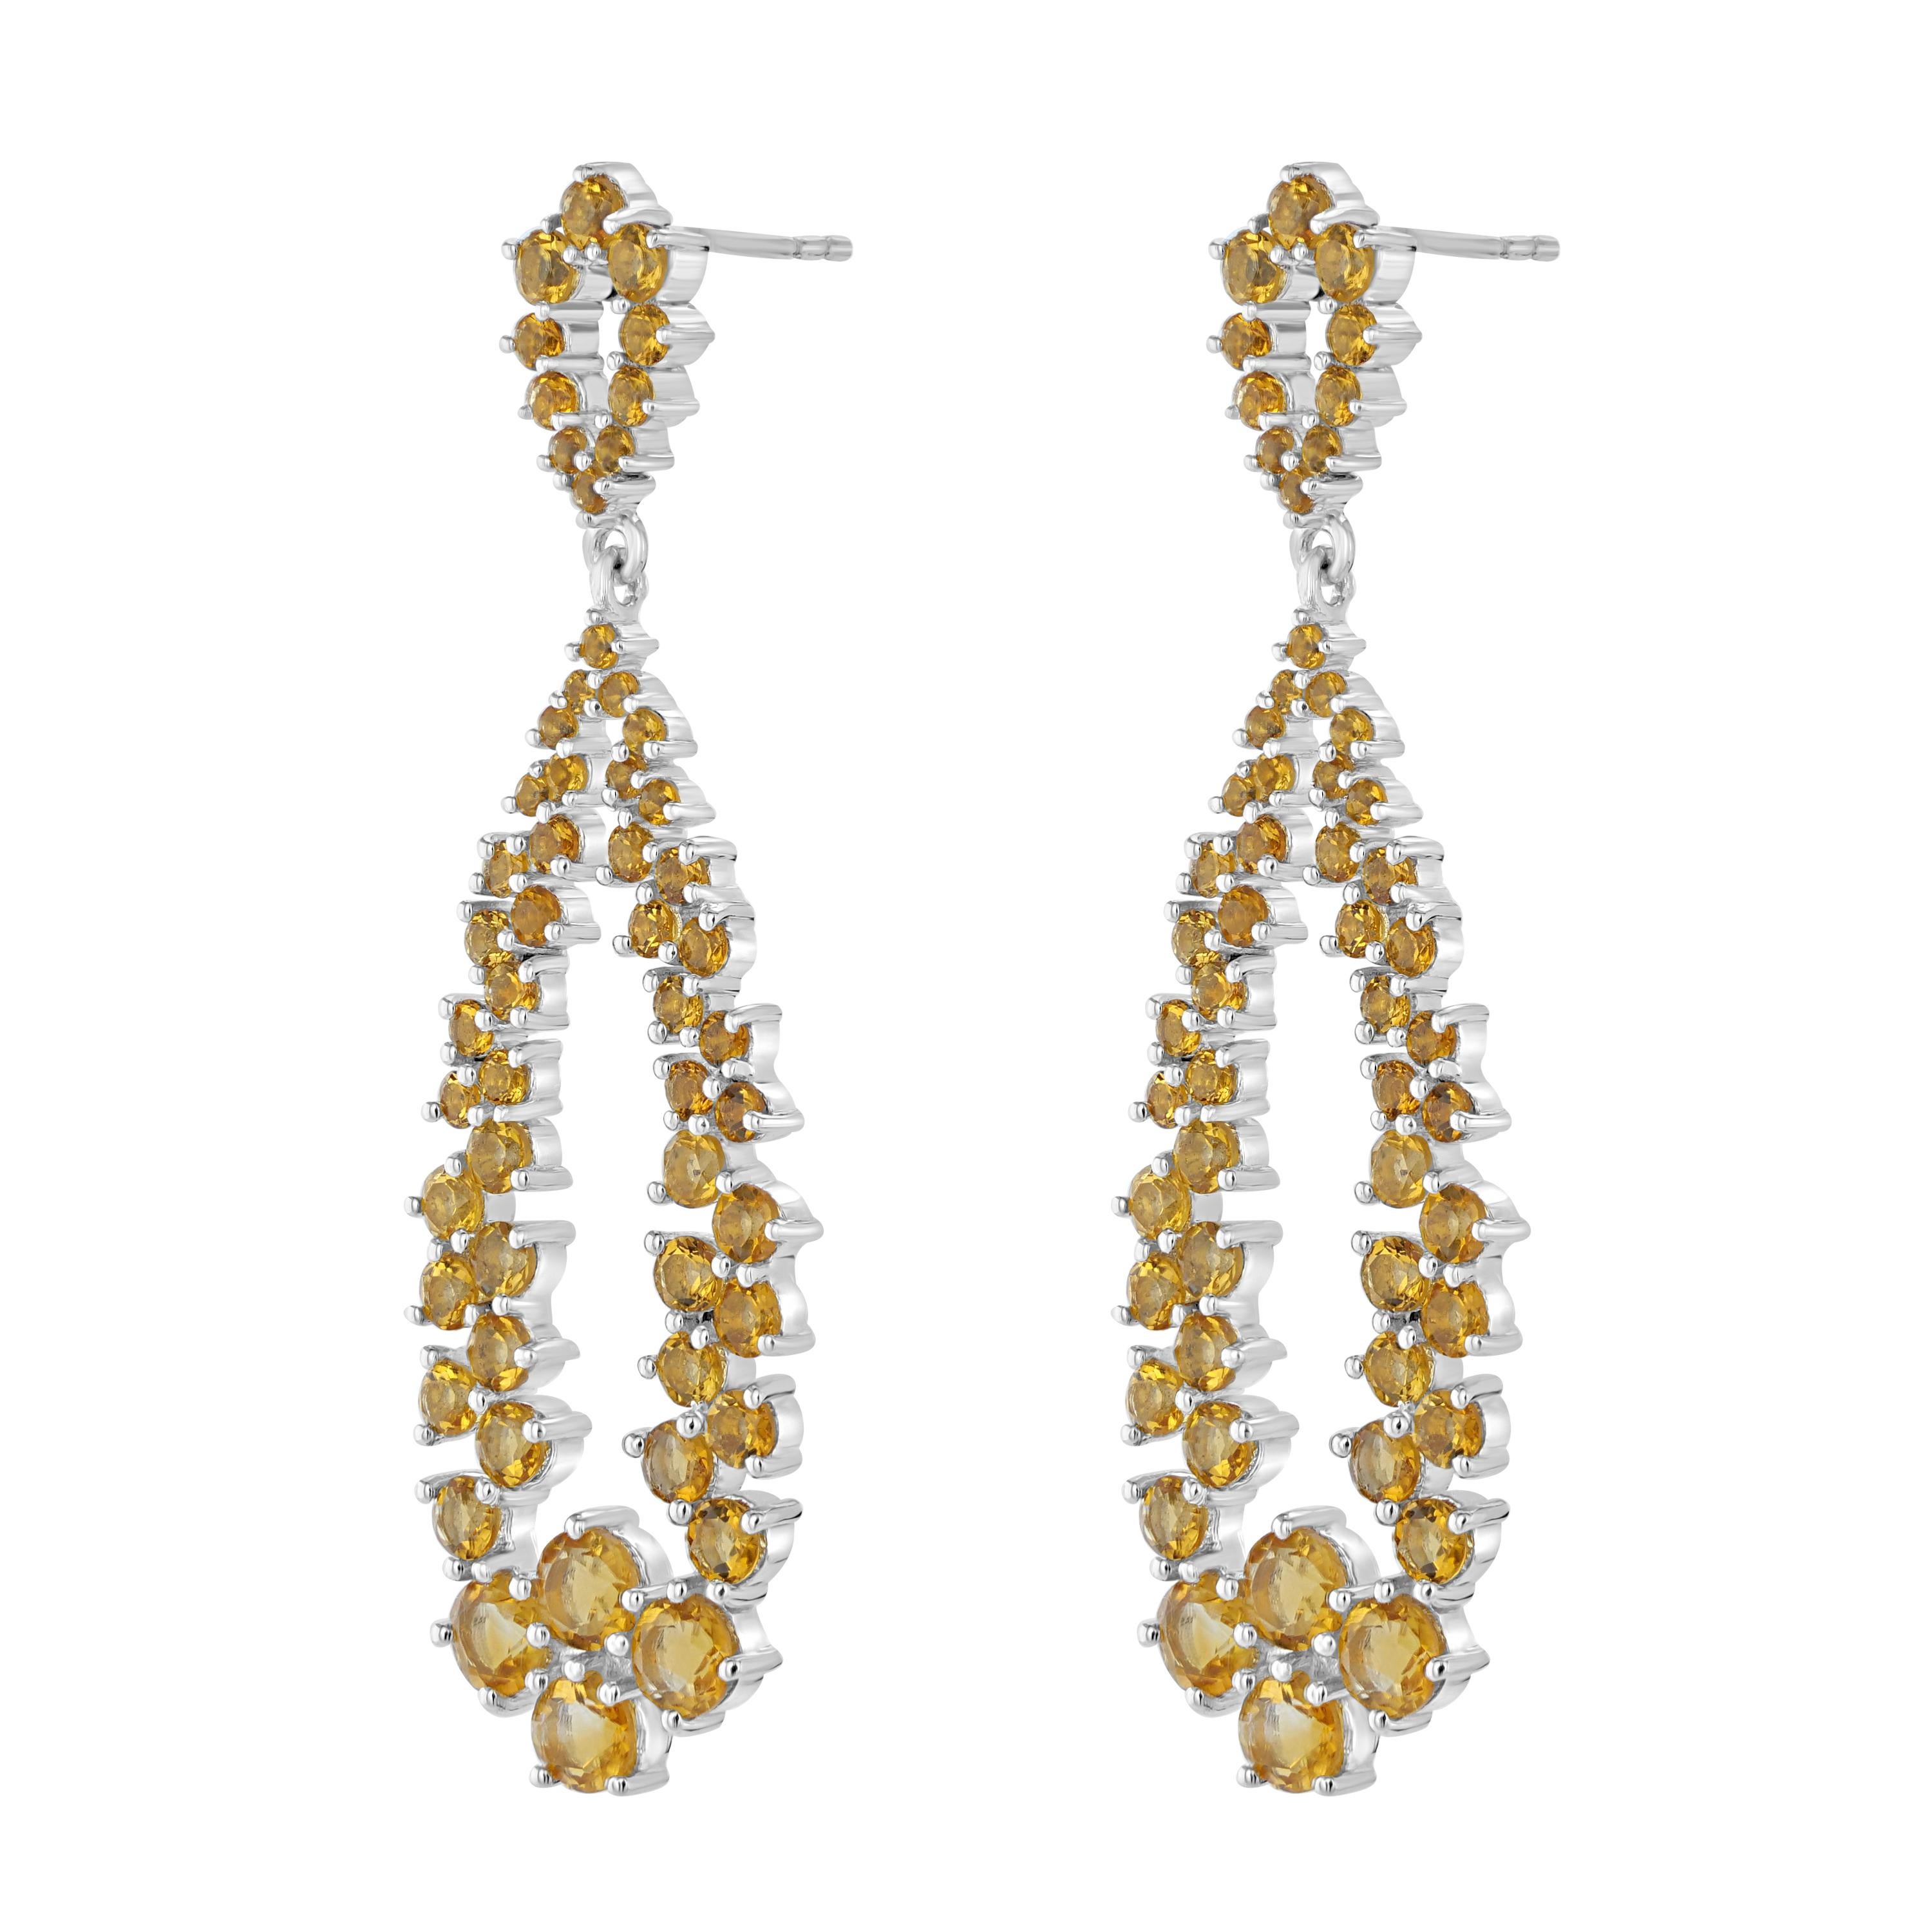 Brighten up your outfits with these sunny citrine women's drop earrings. Featured with 110 citrines in different sizes set in genuine and nickle free 925 sterling silver . These earrings come with post and clutch backs.
JEWELRY